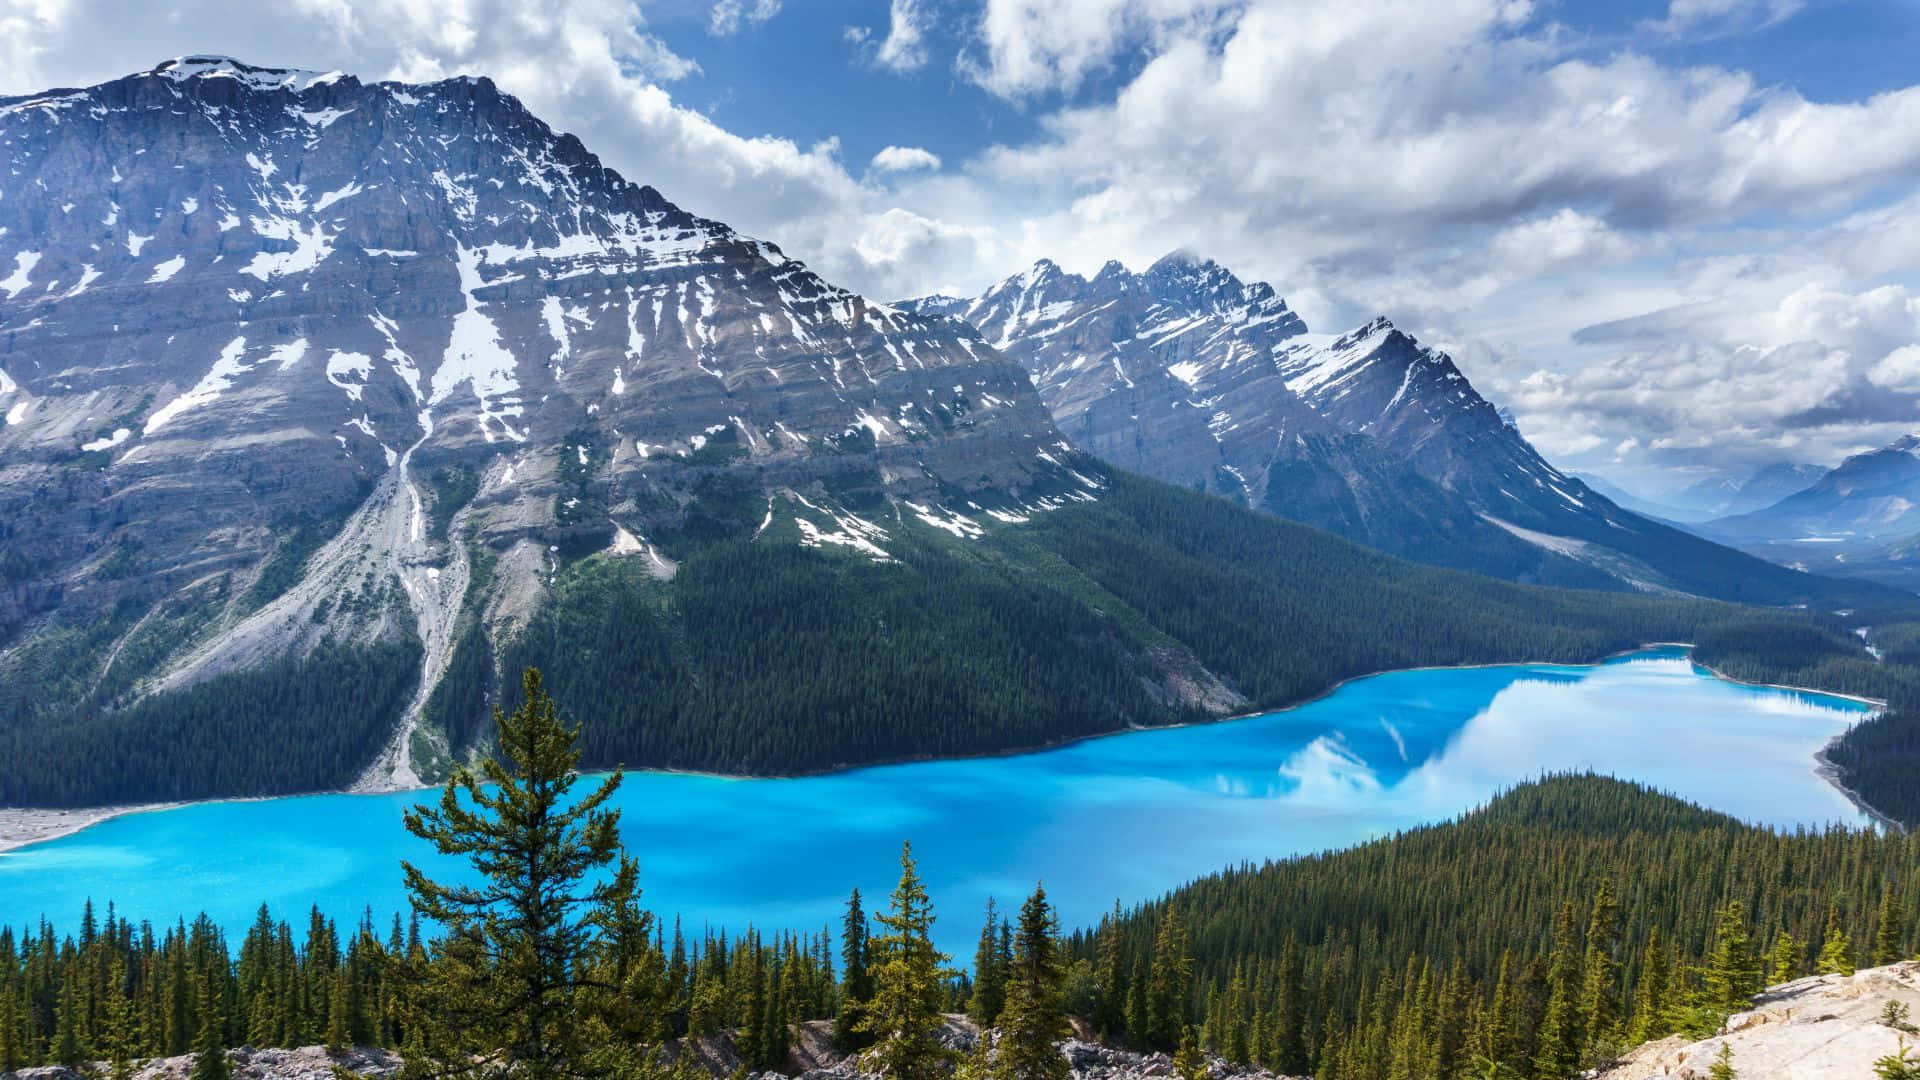 Free Canada Wallpaper Downloads, [300+] Canada Wallpapers for FREE |  